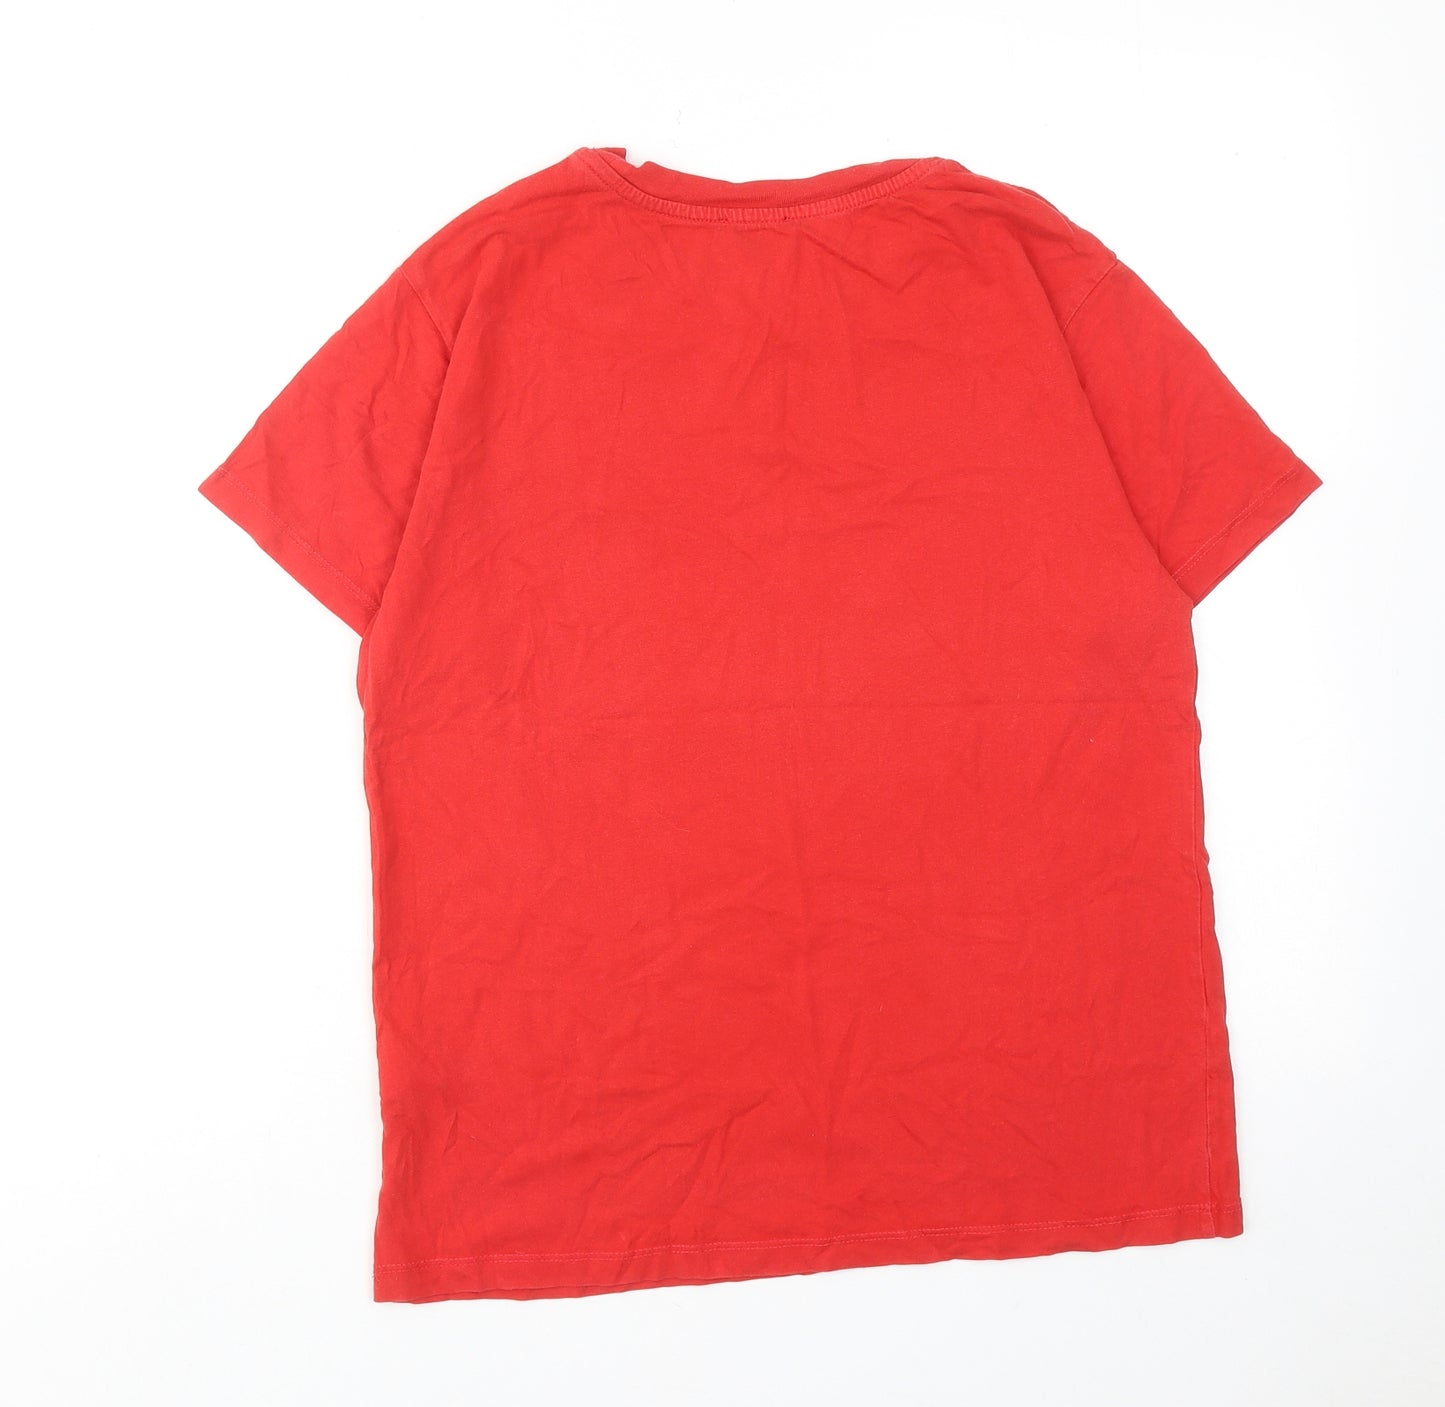 Topshop Womens Red Cotton Basic T-Shirt Size 8 Round Neck - No Worries, Be Happy